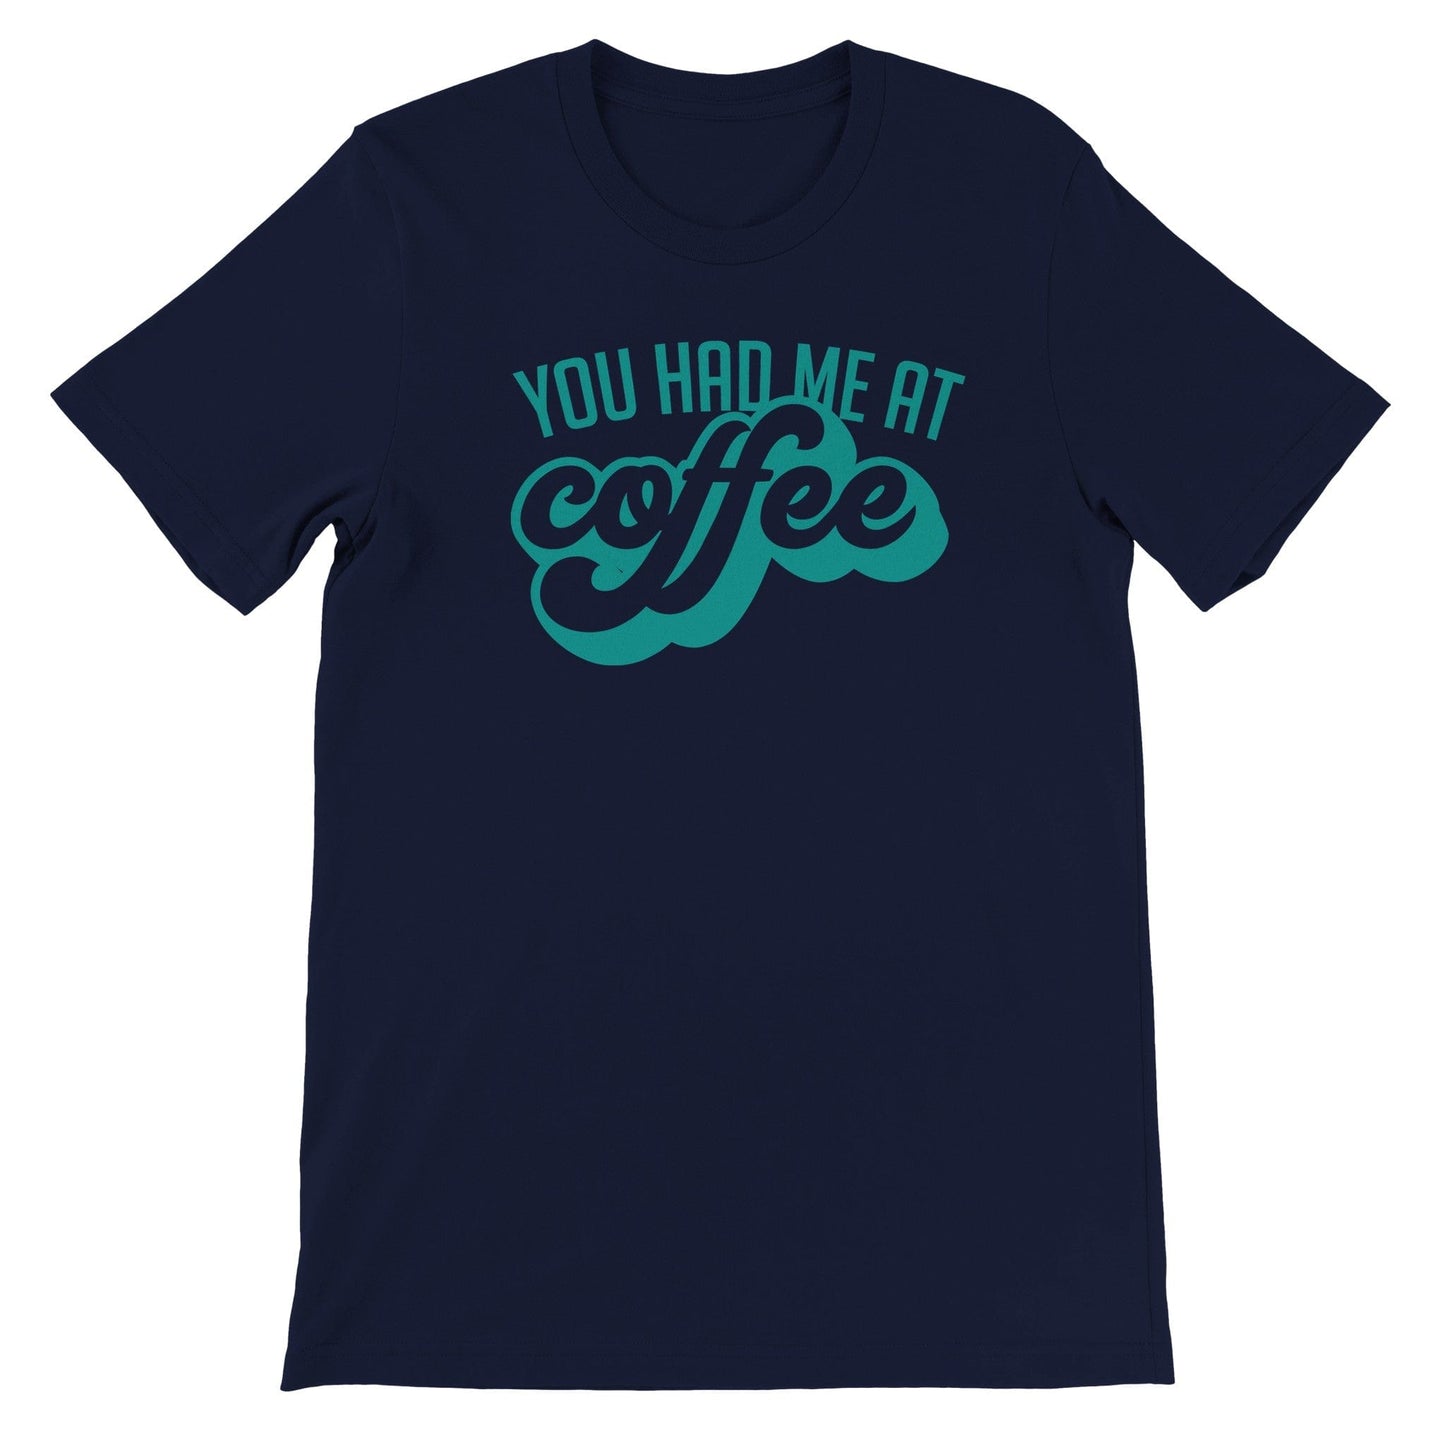 Good Bean Gifts "You Had Me at Coffee" - Unisex Crewneck T-shirt Navy / S